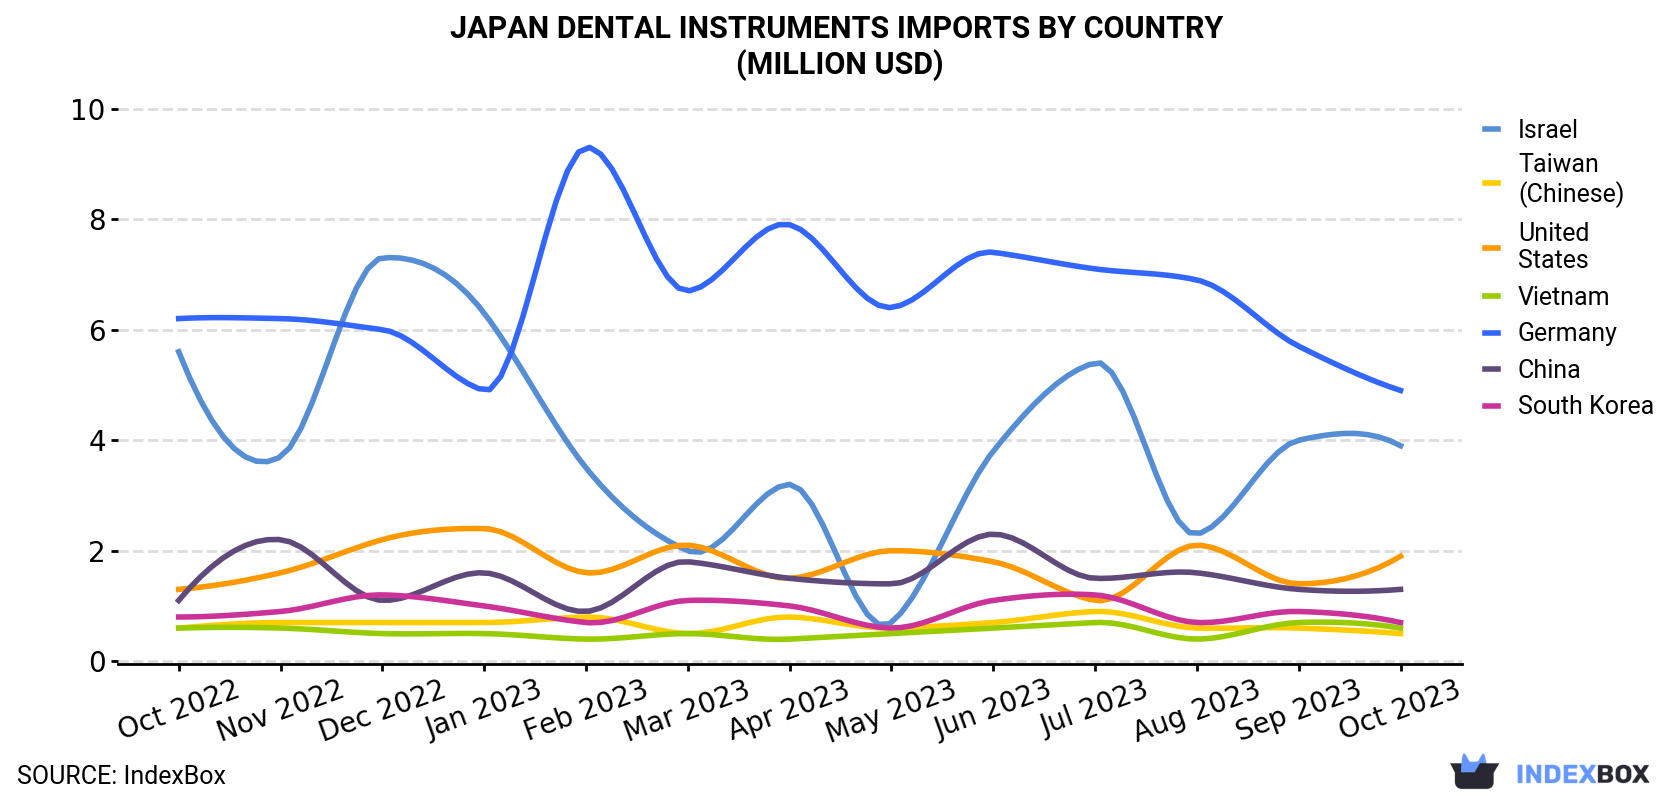 Japan Dental Instruments Imports By Country (Million USD)